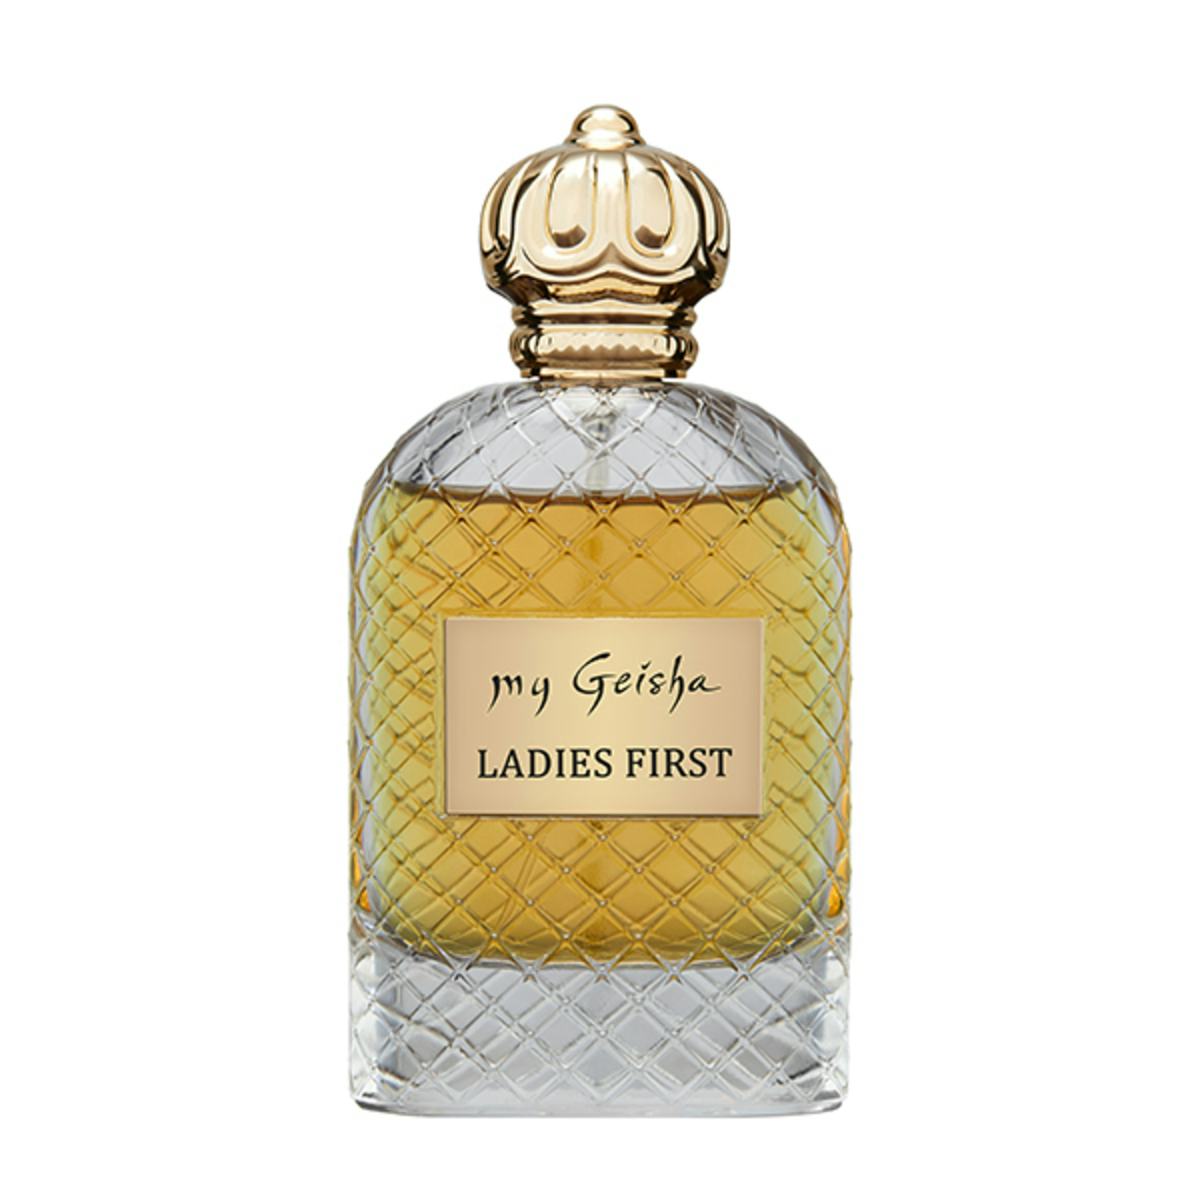 Perfume extract "Ladies First" 100 ml, artisanal product for direct sale in Switzerland